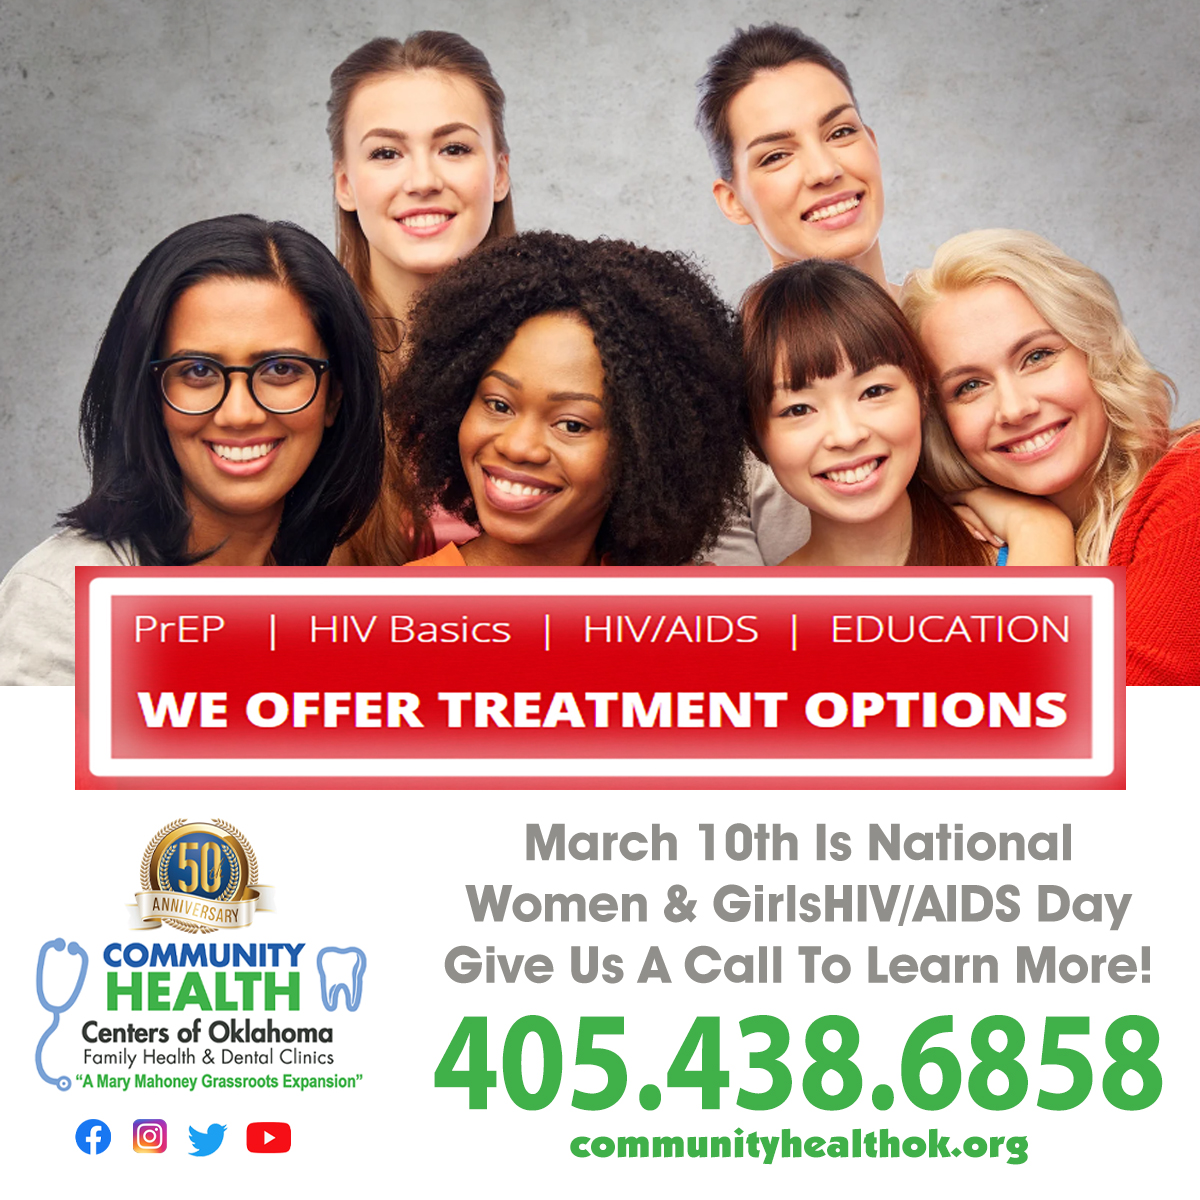 March 10th is National Women and Girls HIV/AIDS Awareness Day.
Help reduce HIV stigma and promote testing, prevention, and treatment.
Have questions? Call us at 405.438.6858
#HIV/AIDSPREVENTION #HIV/AIDSEDUCATION #HIV/AIDS #HIV/AIDSTREATMENT